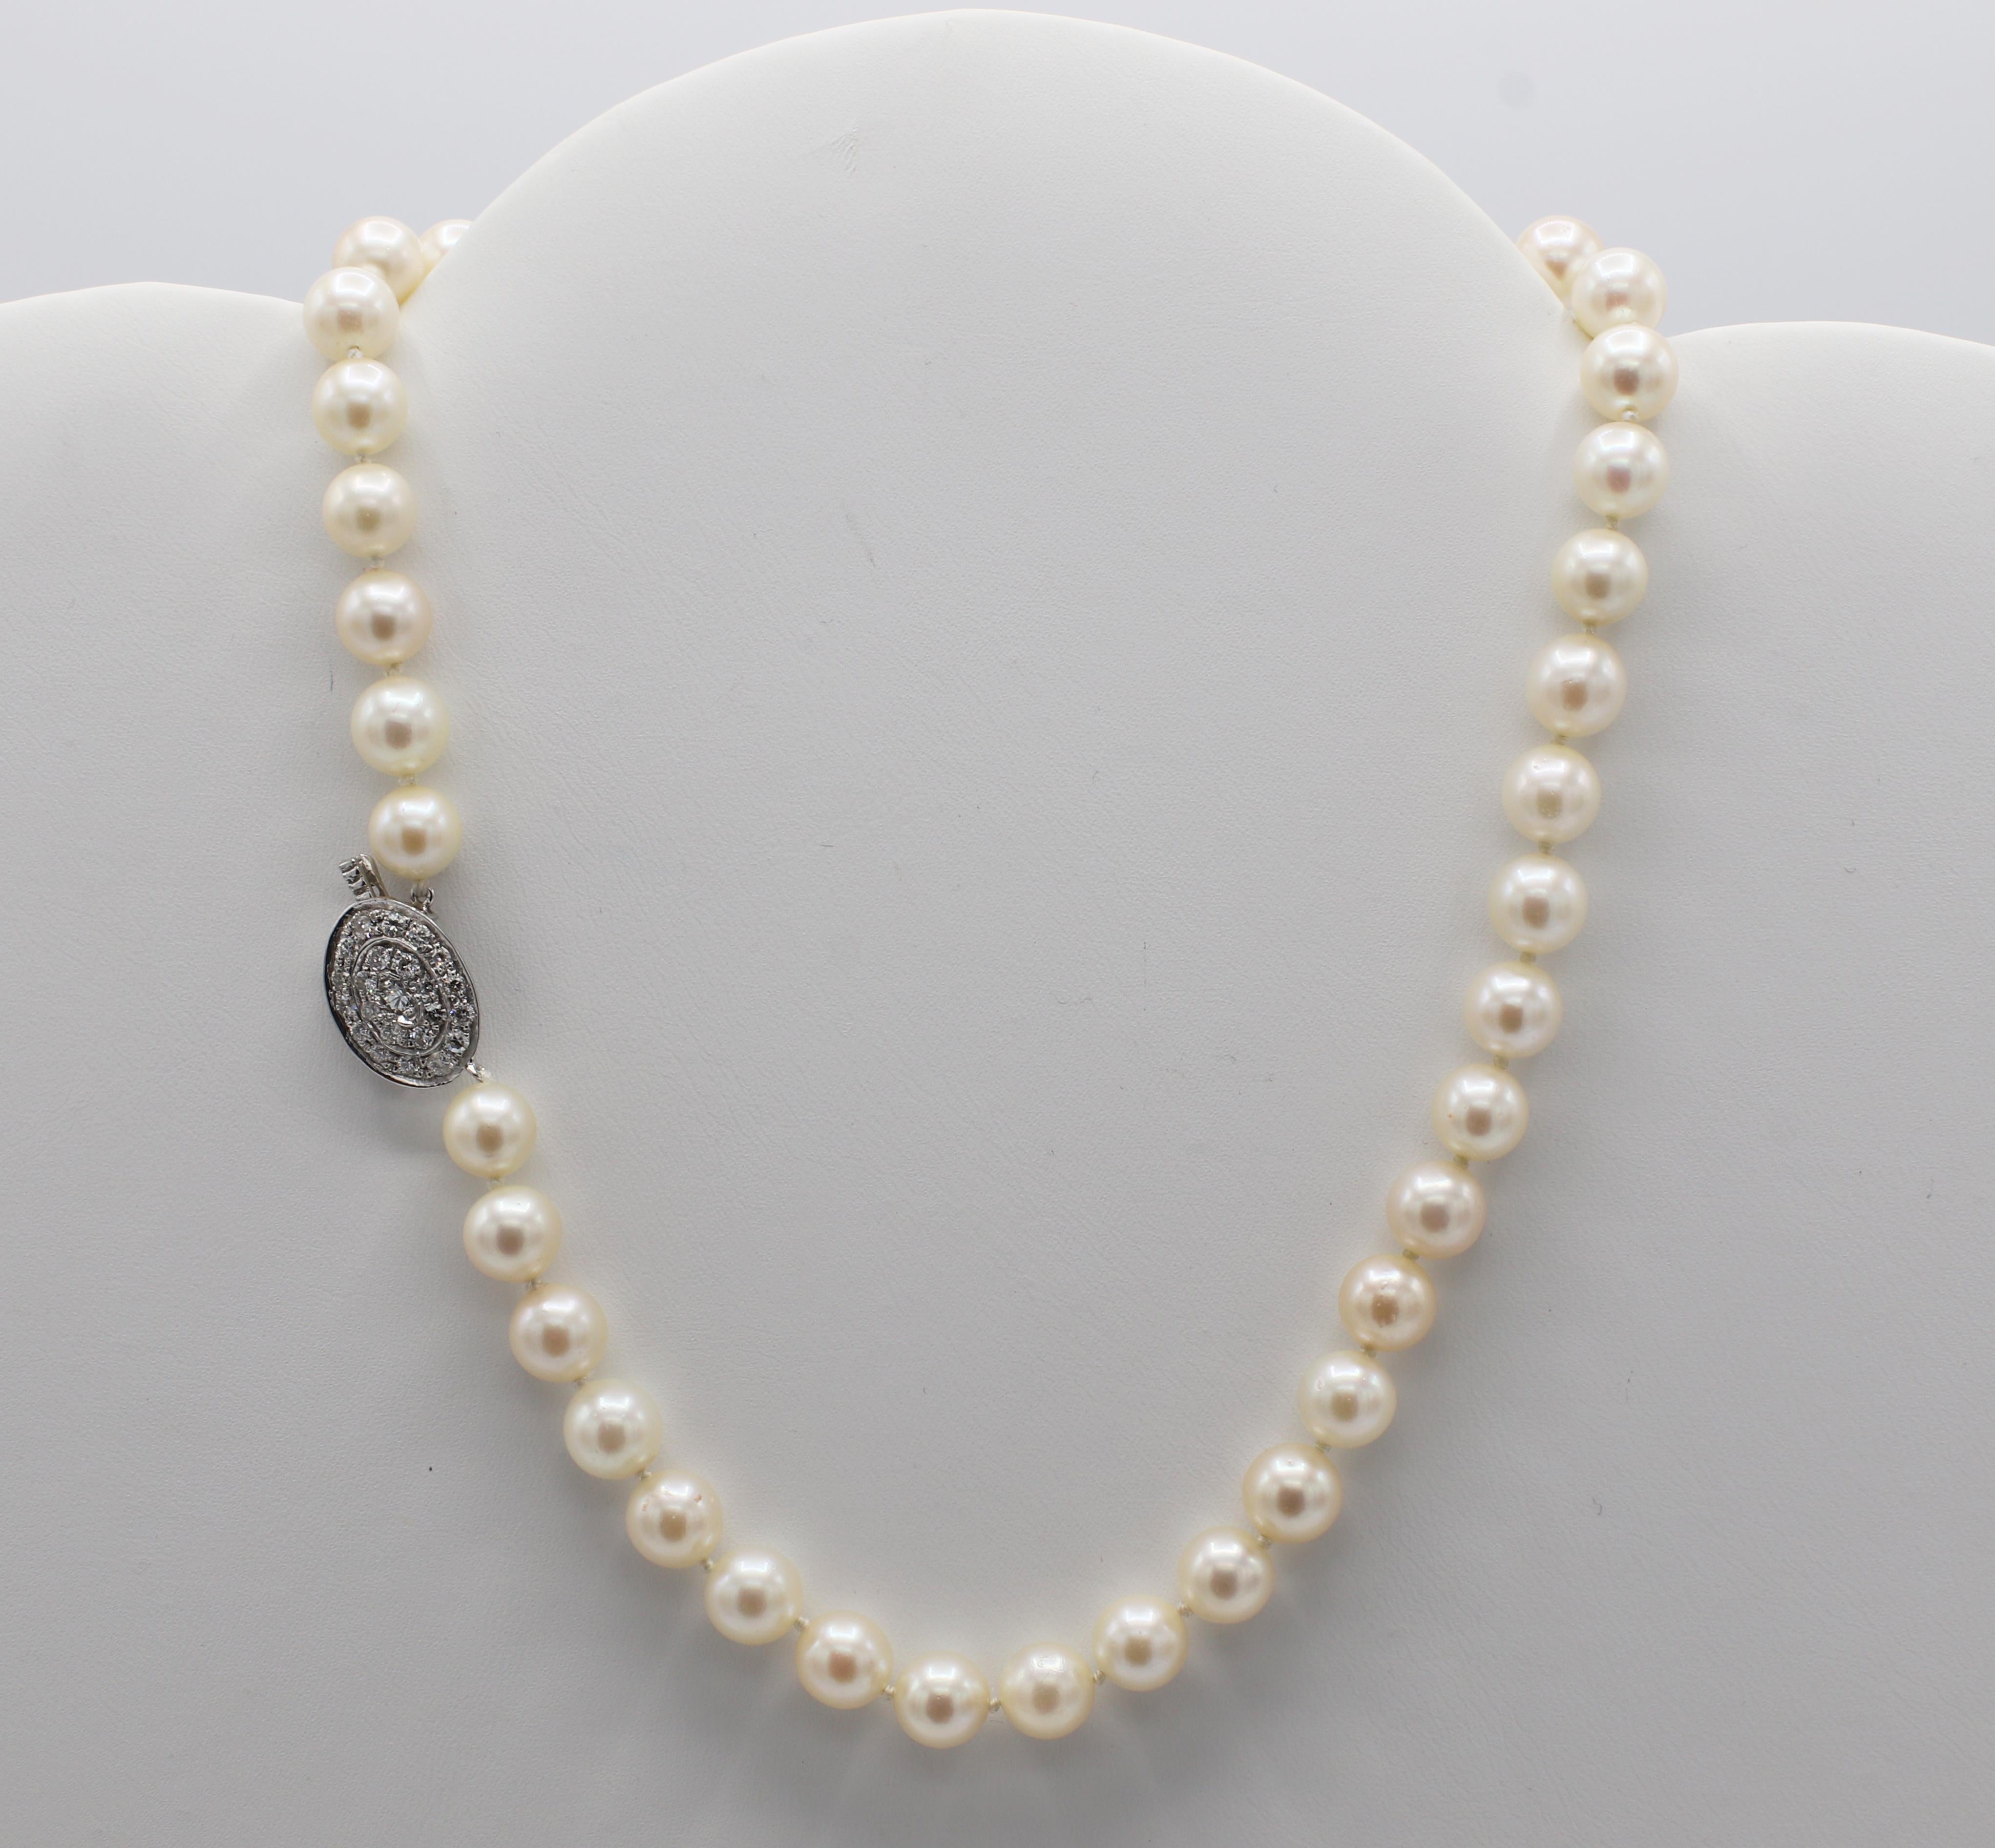 14 Karat White Gold Pave Natural Diamond .75 Carat Single Strand Cultured Pearl Choker Necklace
Metal: 14k white gold
Weight: 26.6 grams
Diamonds: Approx. .75 CTW G VS natural diamonds
Pearls: Cultured, 7.3MM white pearls with a creamy